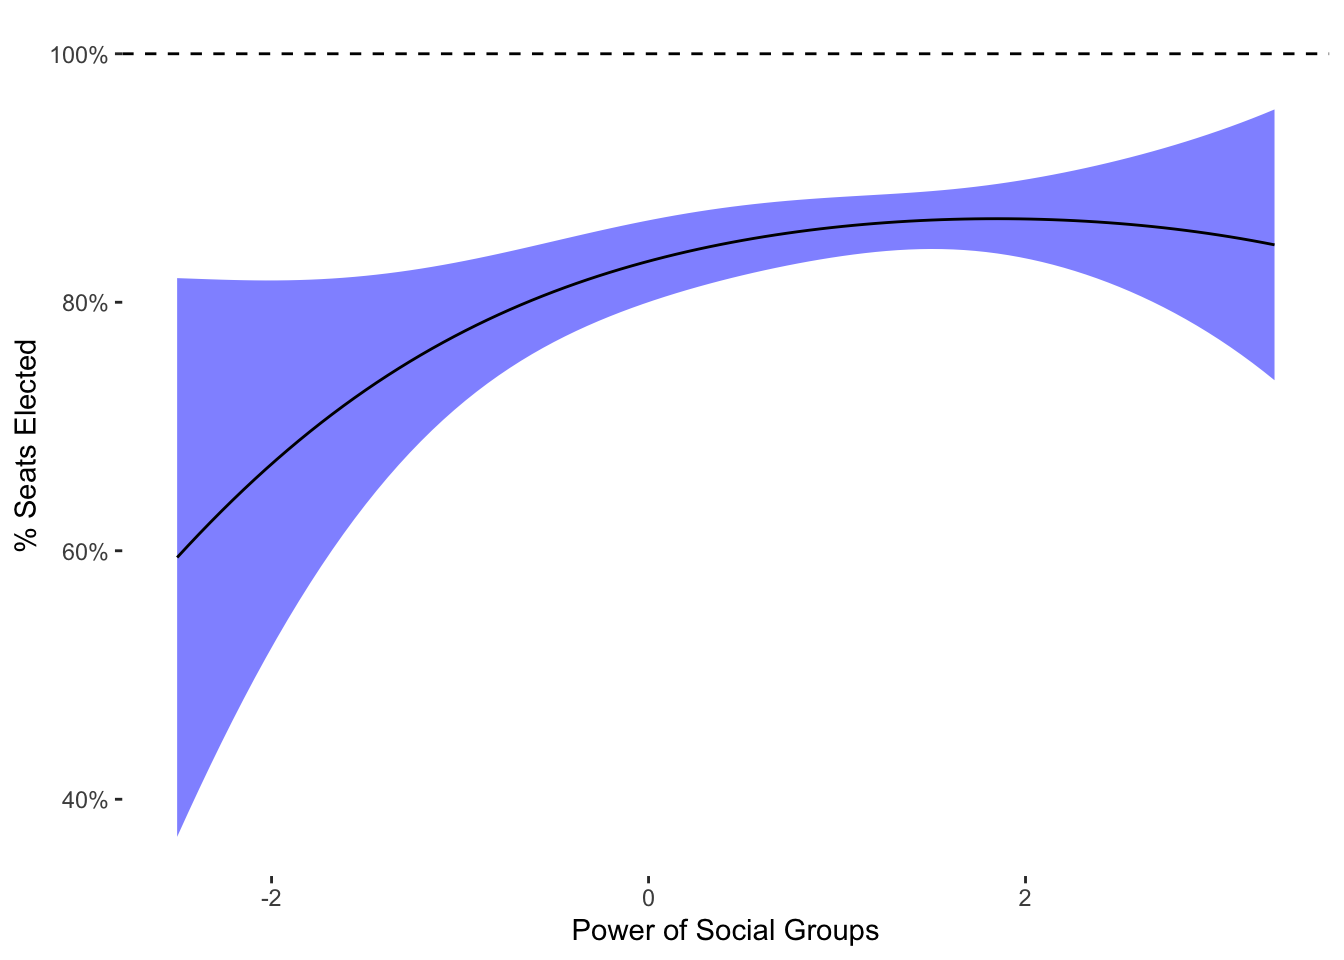 Beta Regression Predicted Values of Elected Lower Chamber Seats Given Power of Social Groups